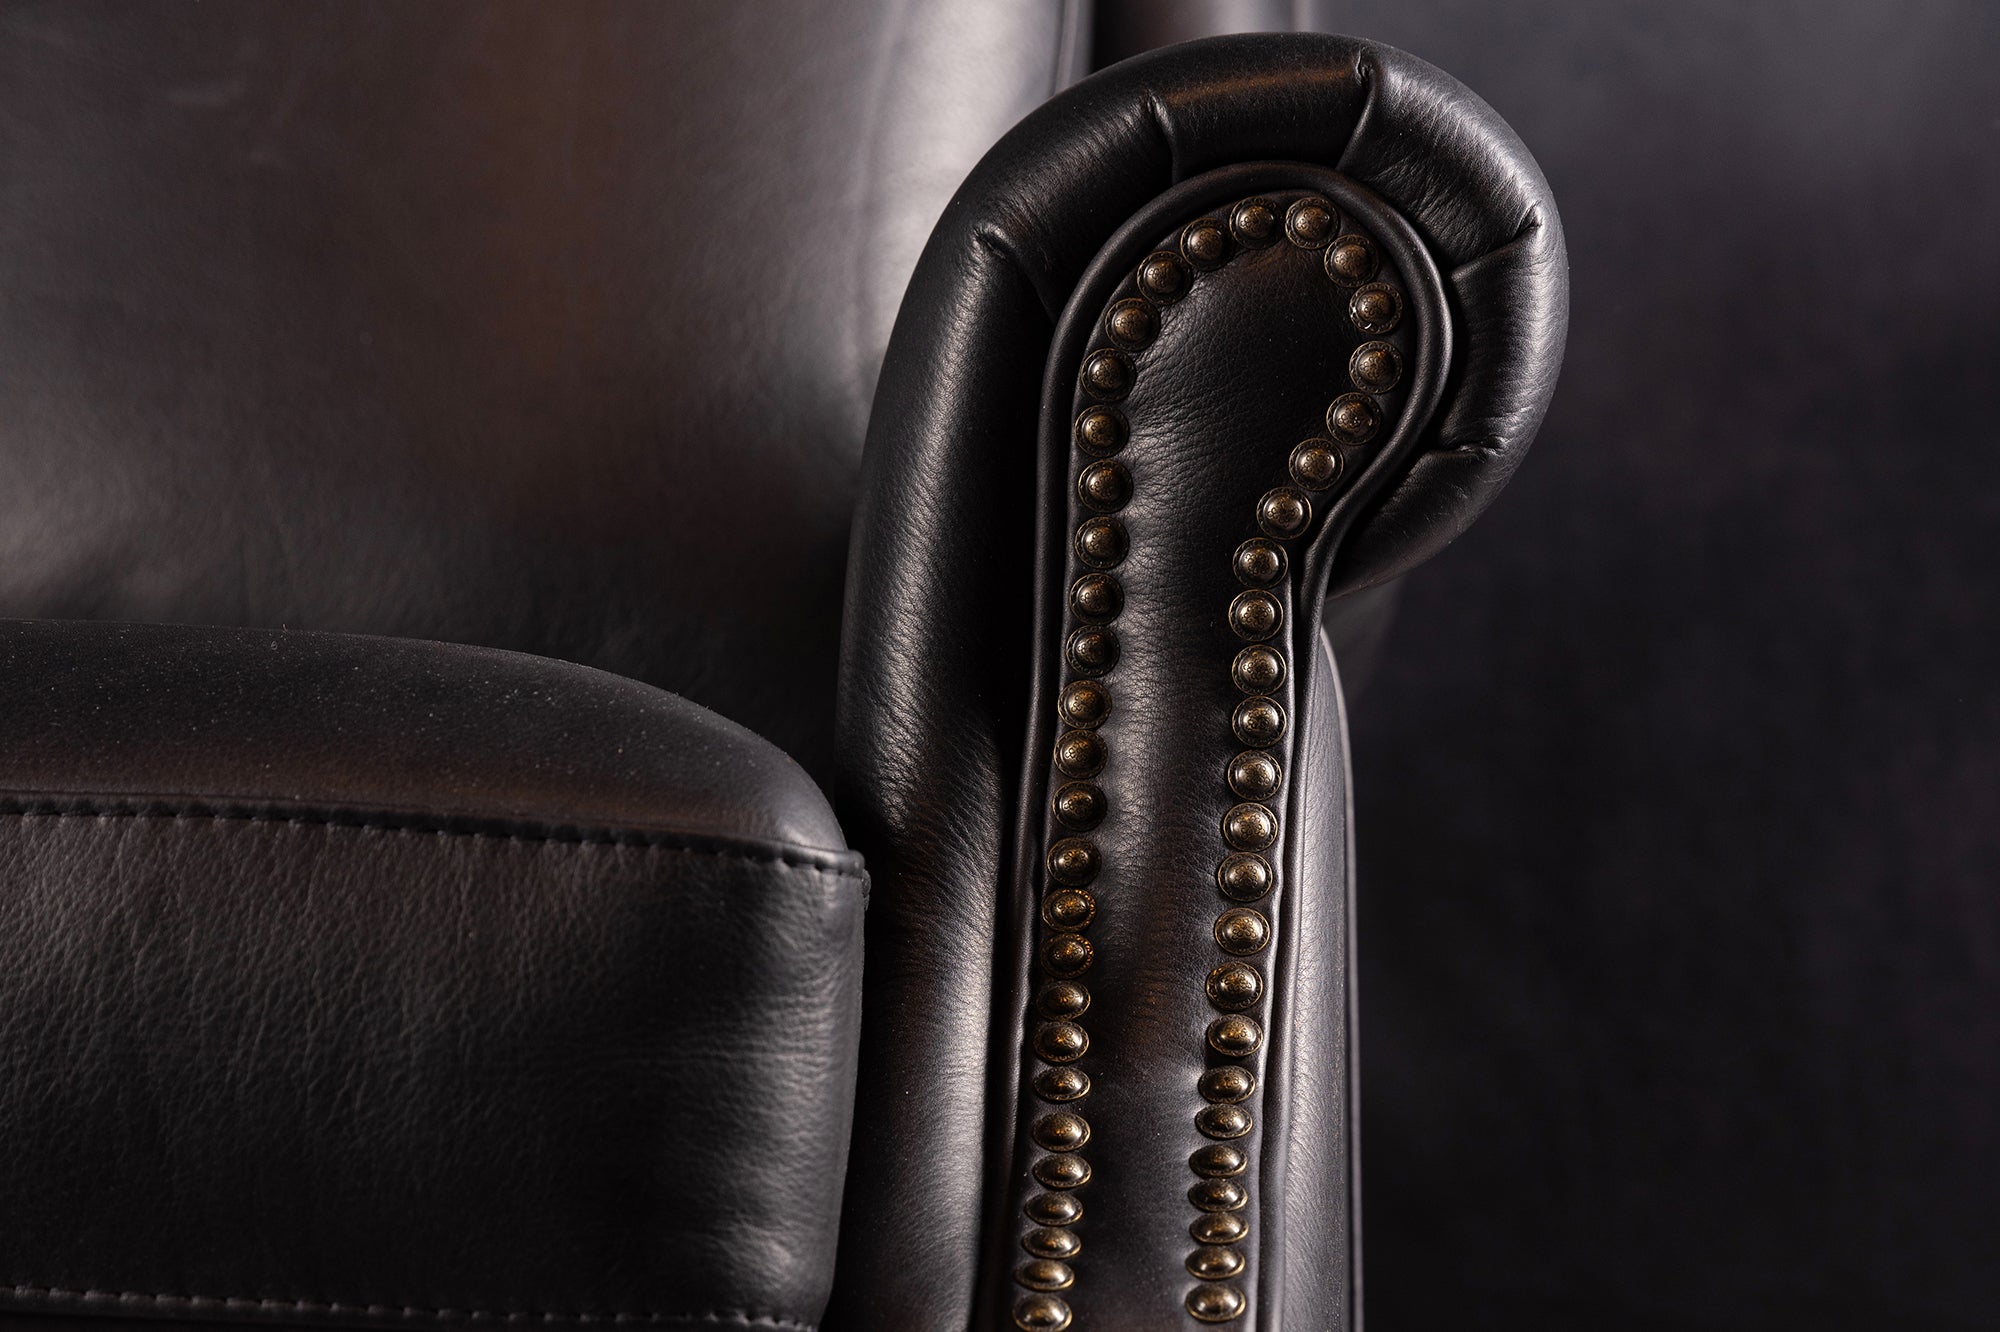 LORD BARON RECLINER CHAIR